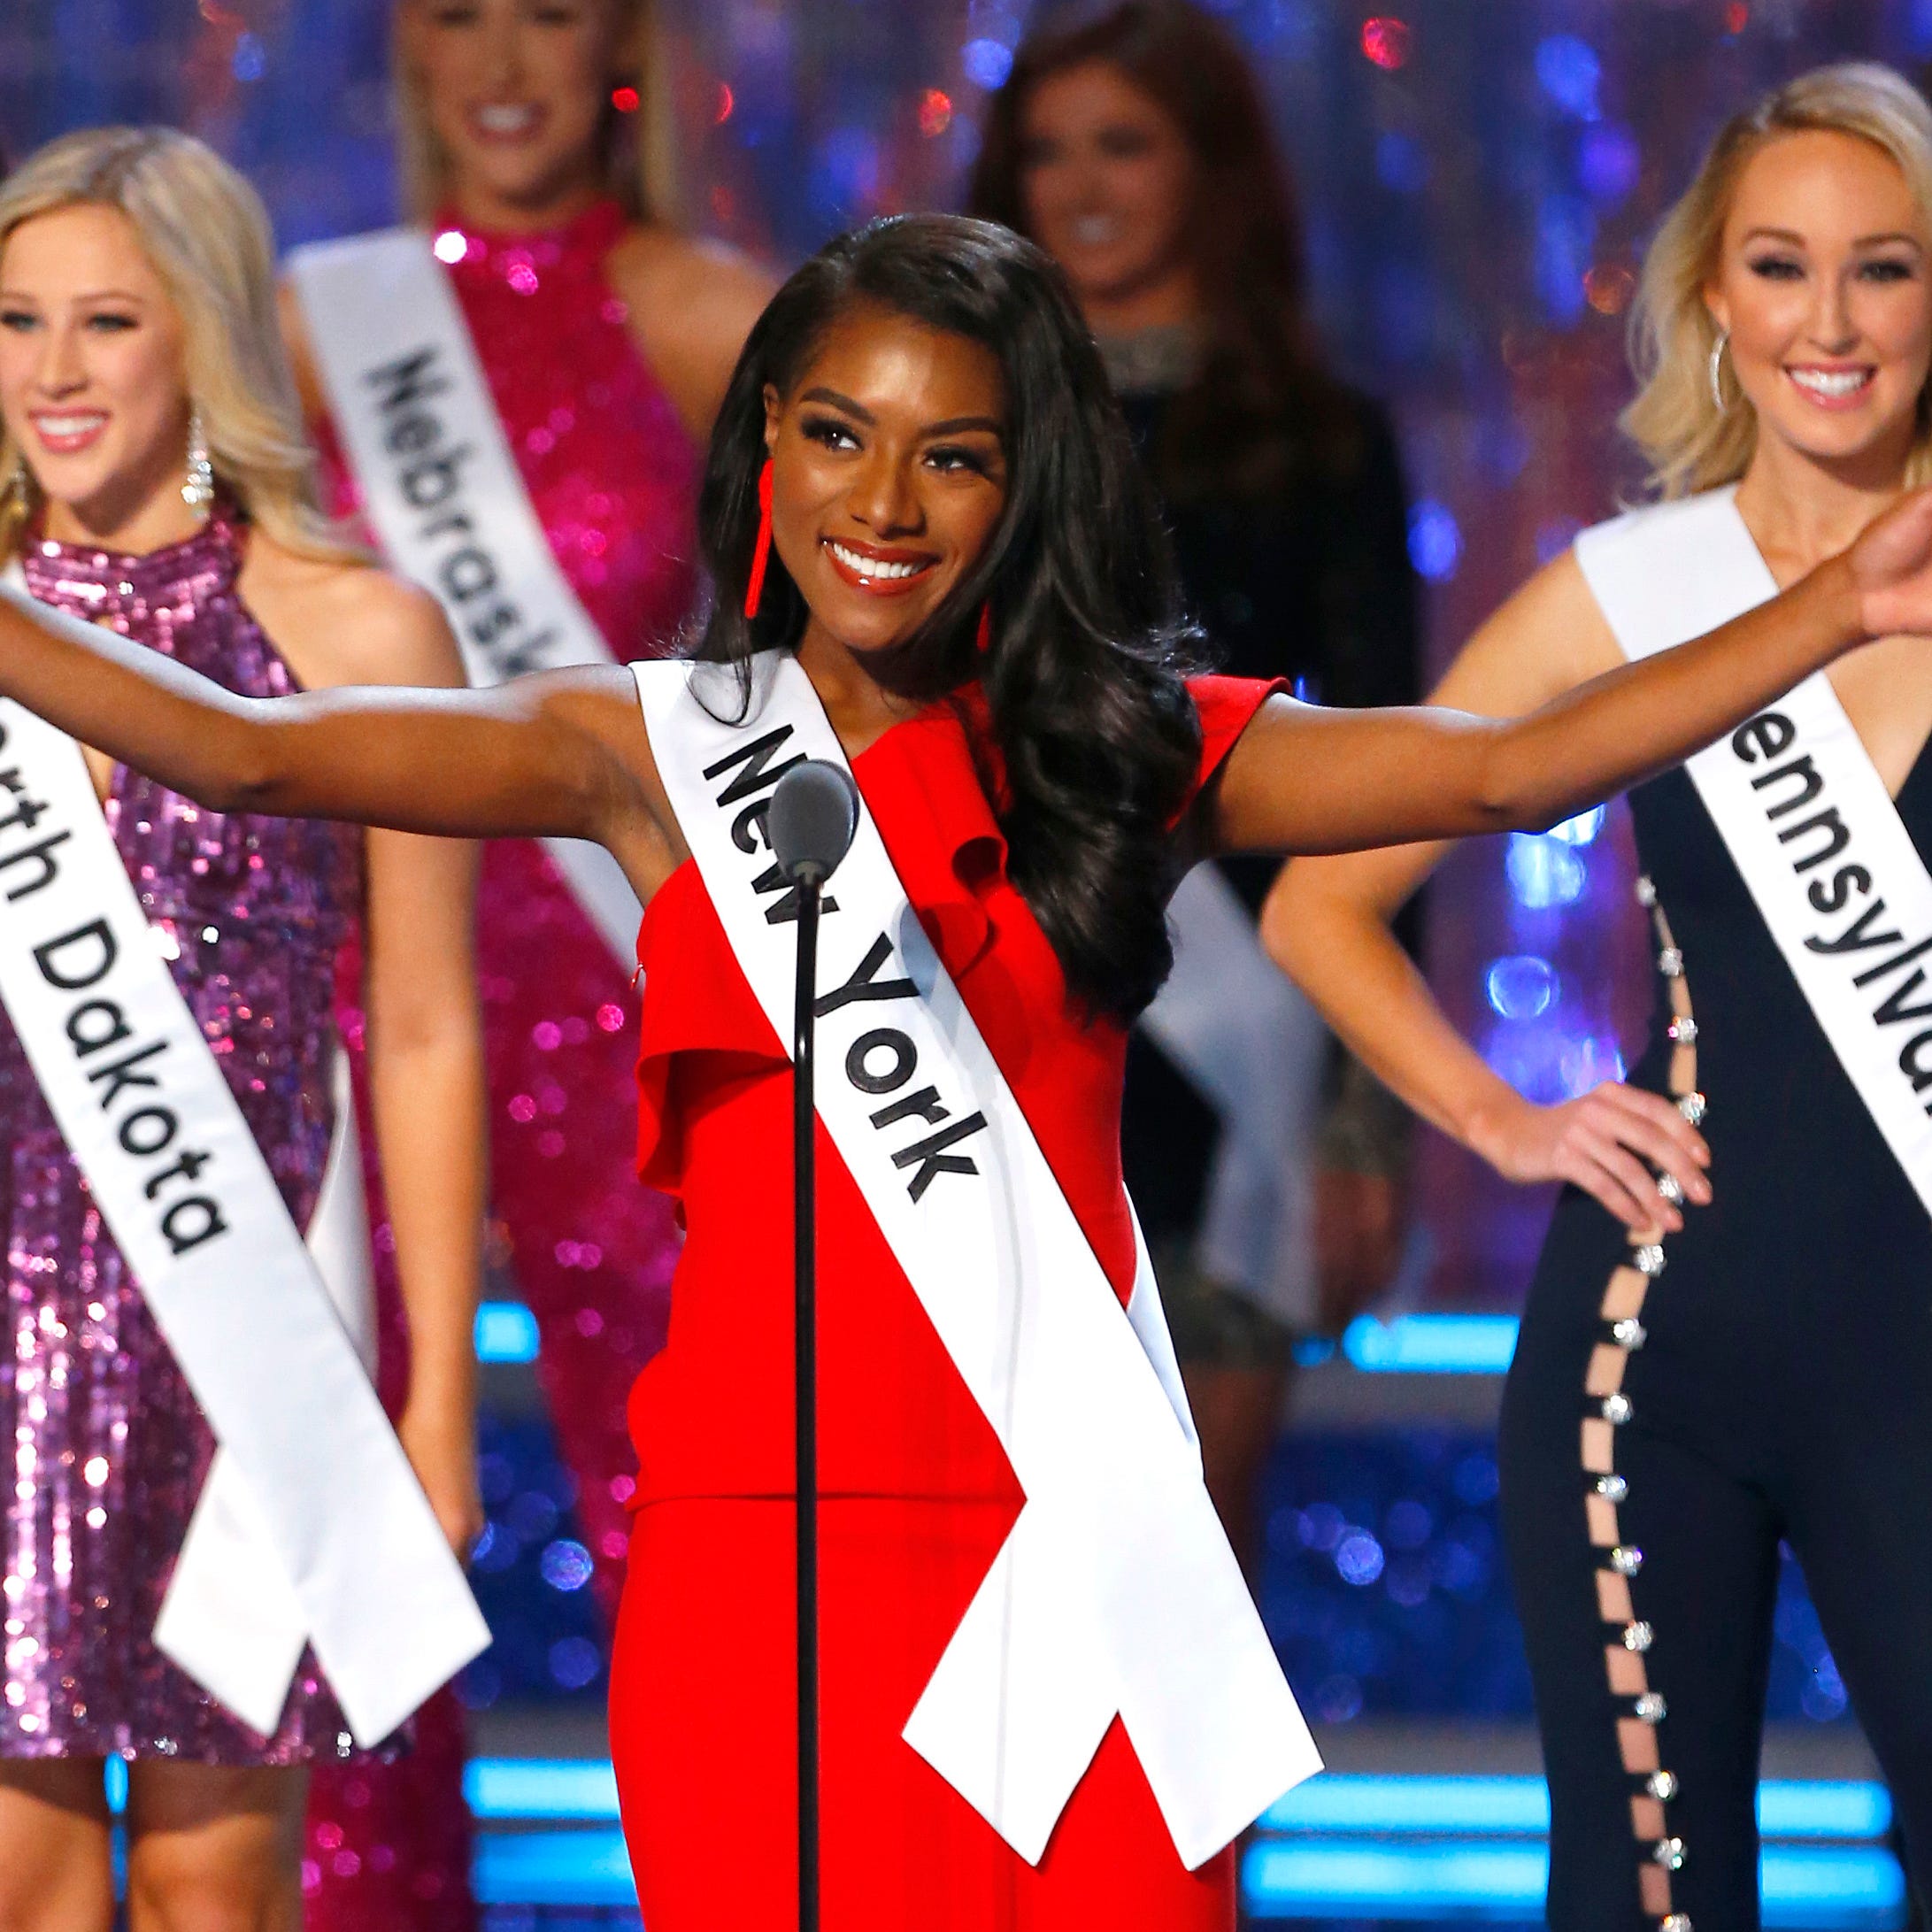 Maybe Miss America 2019, Nia Franklin, doesn't want to hear this...